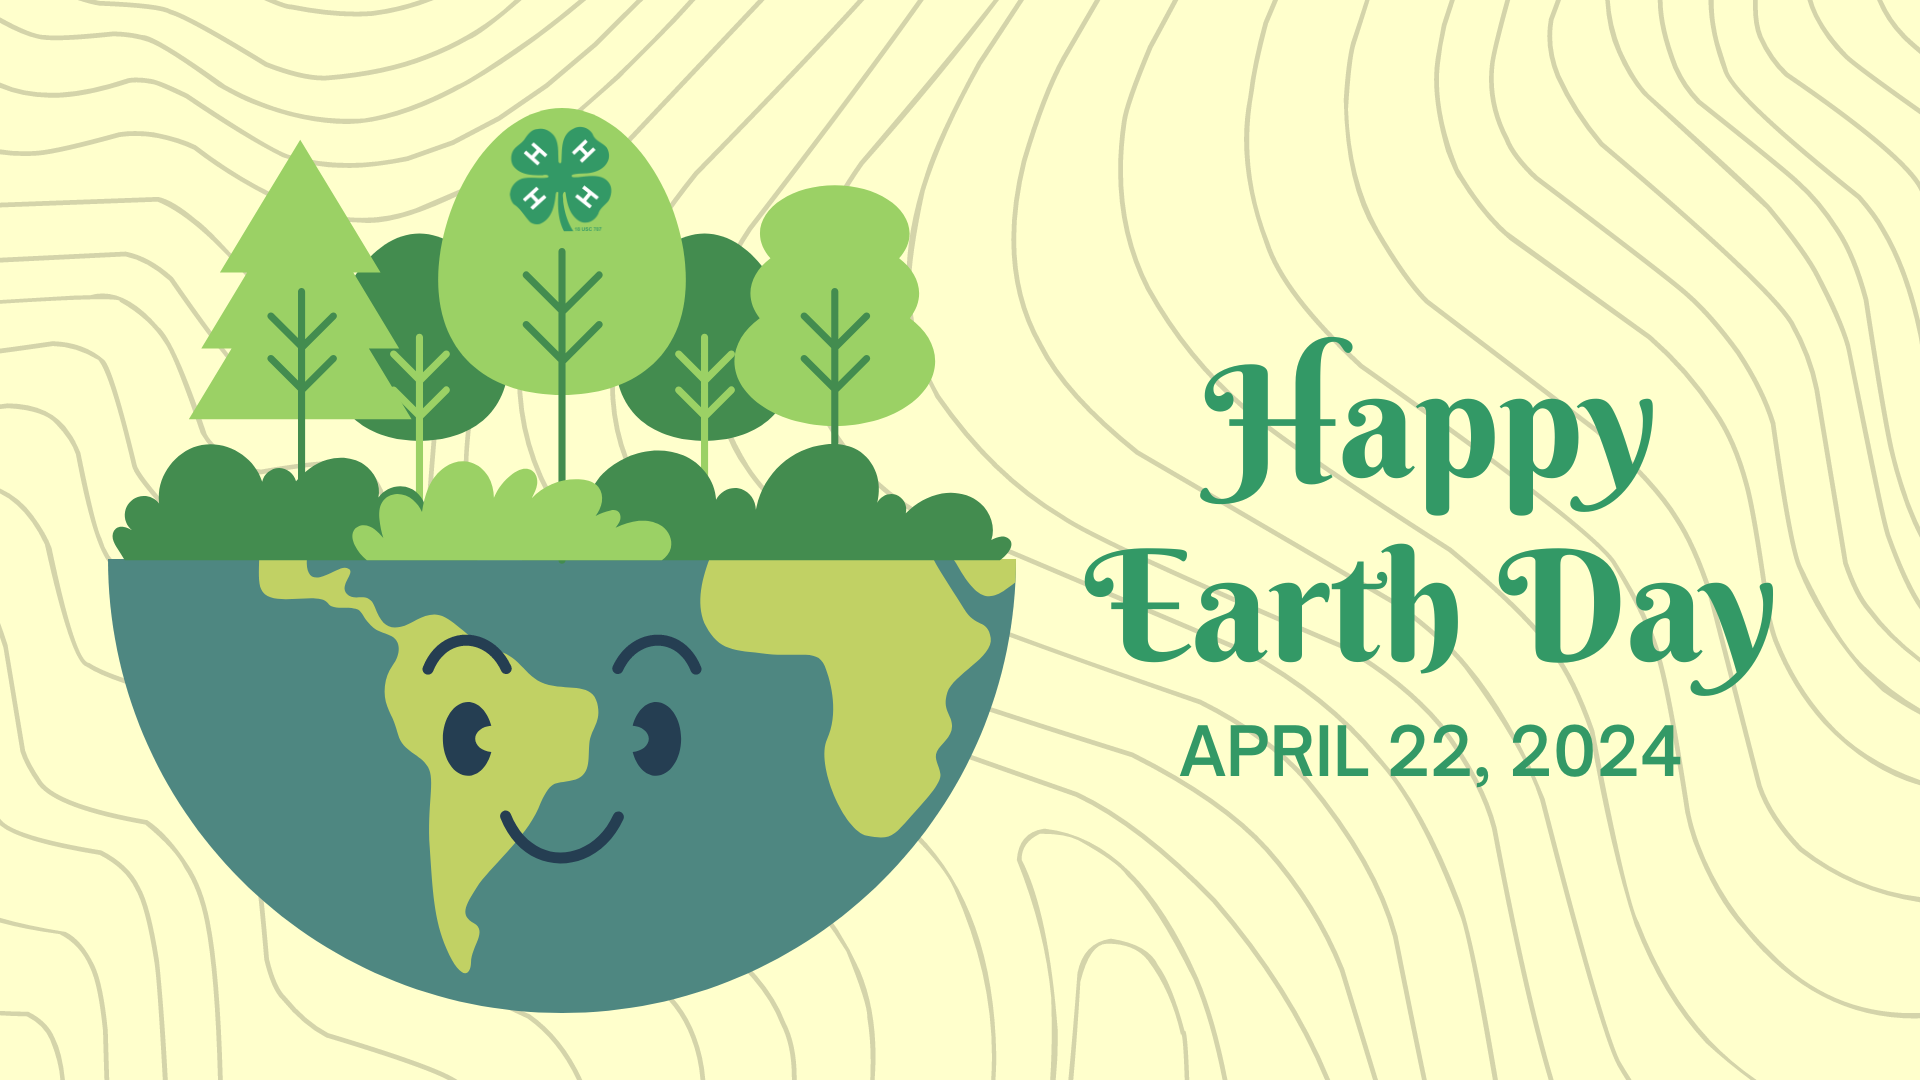 Half of an Earth with trees growing out of the top half. Earth is smiling and there is a 4-H Clover in the middle tree. Happy Earth Day, April 22, 2024 is written out to the right. Background is green with light brown contour lines